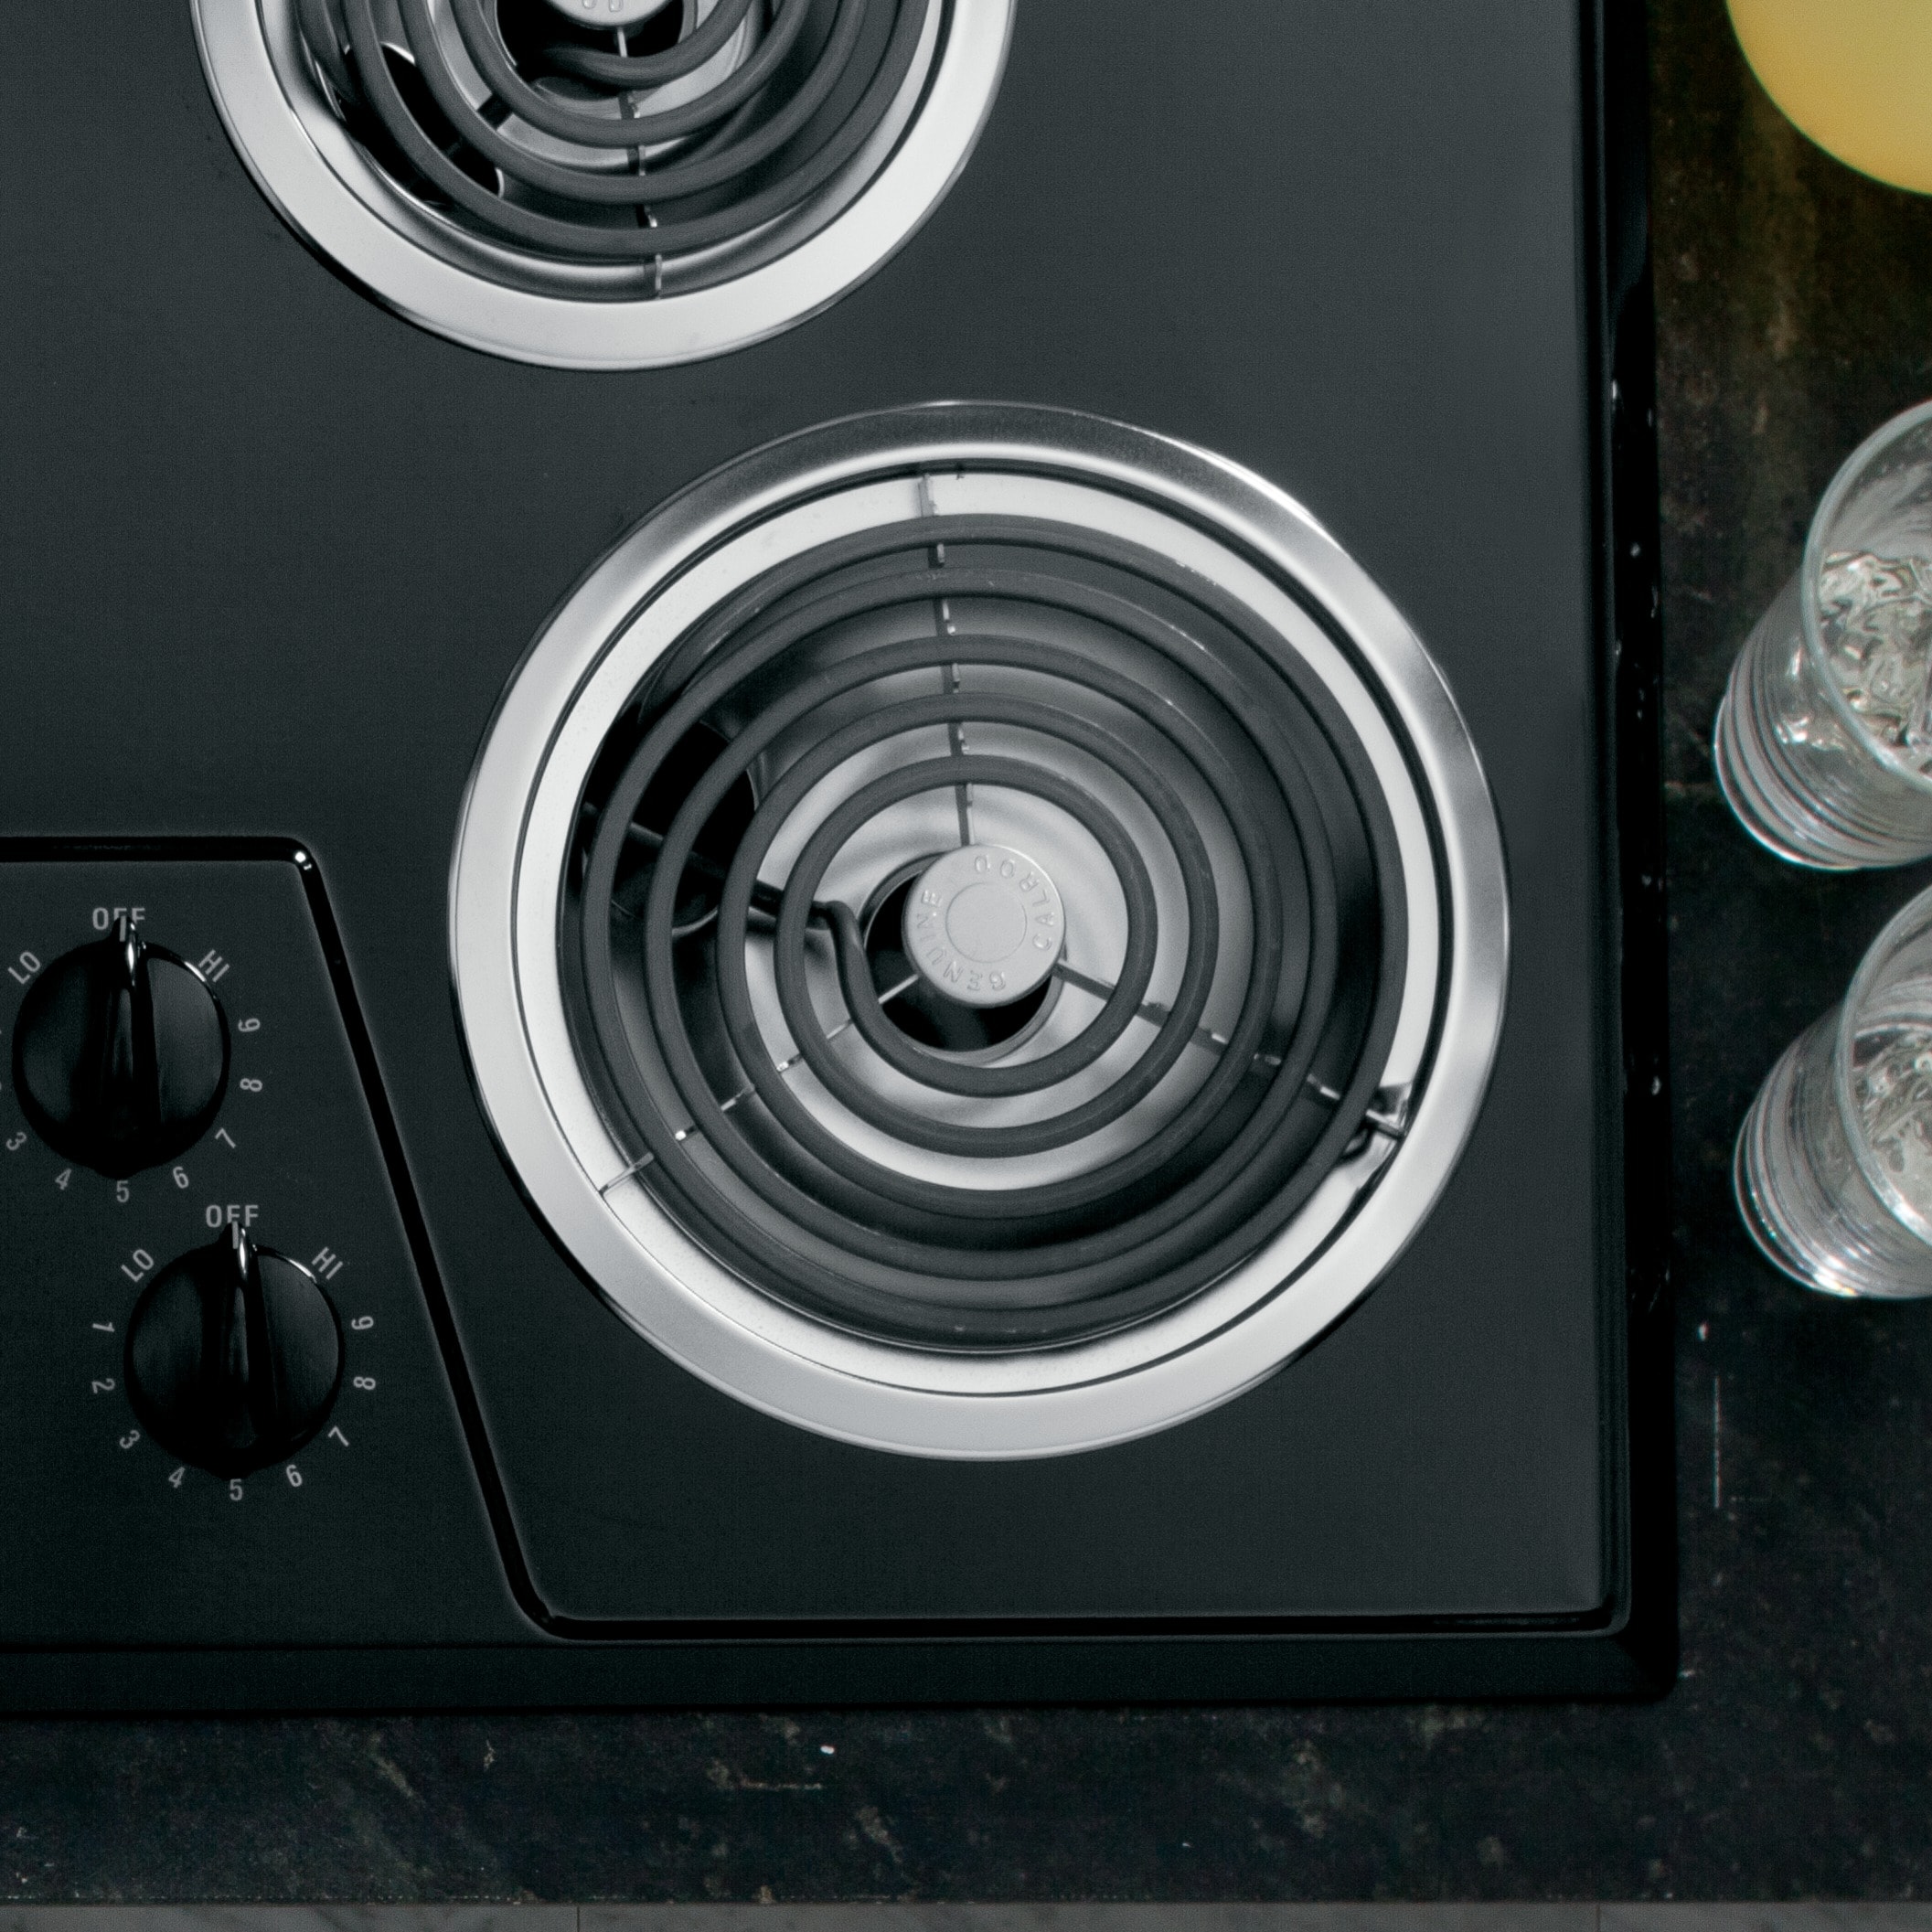 GE 30-in 4 Elements Coil Black Electric Cooktop in the Electric Cooktops  department at